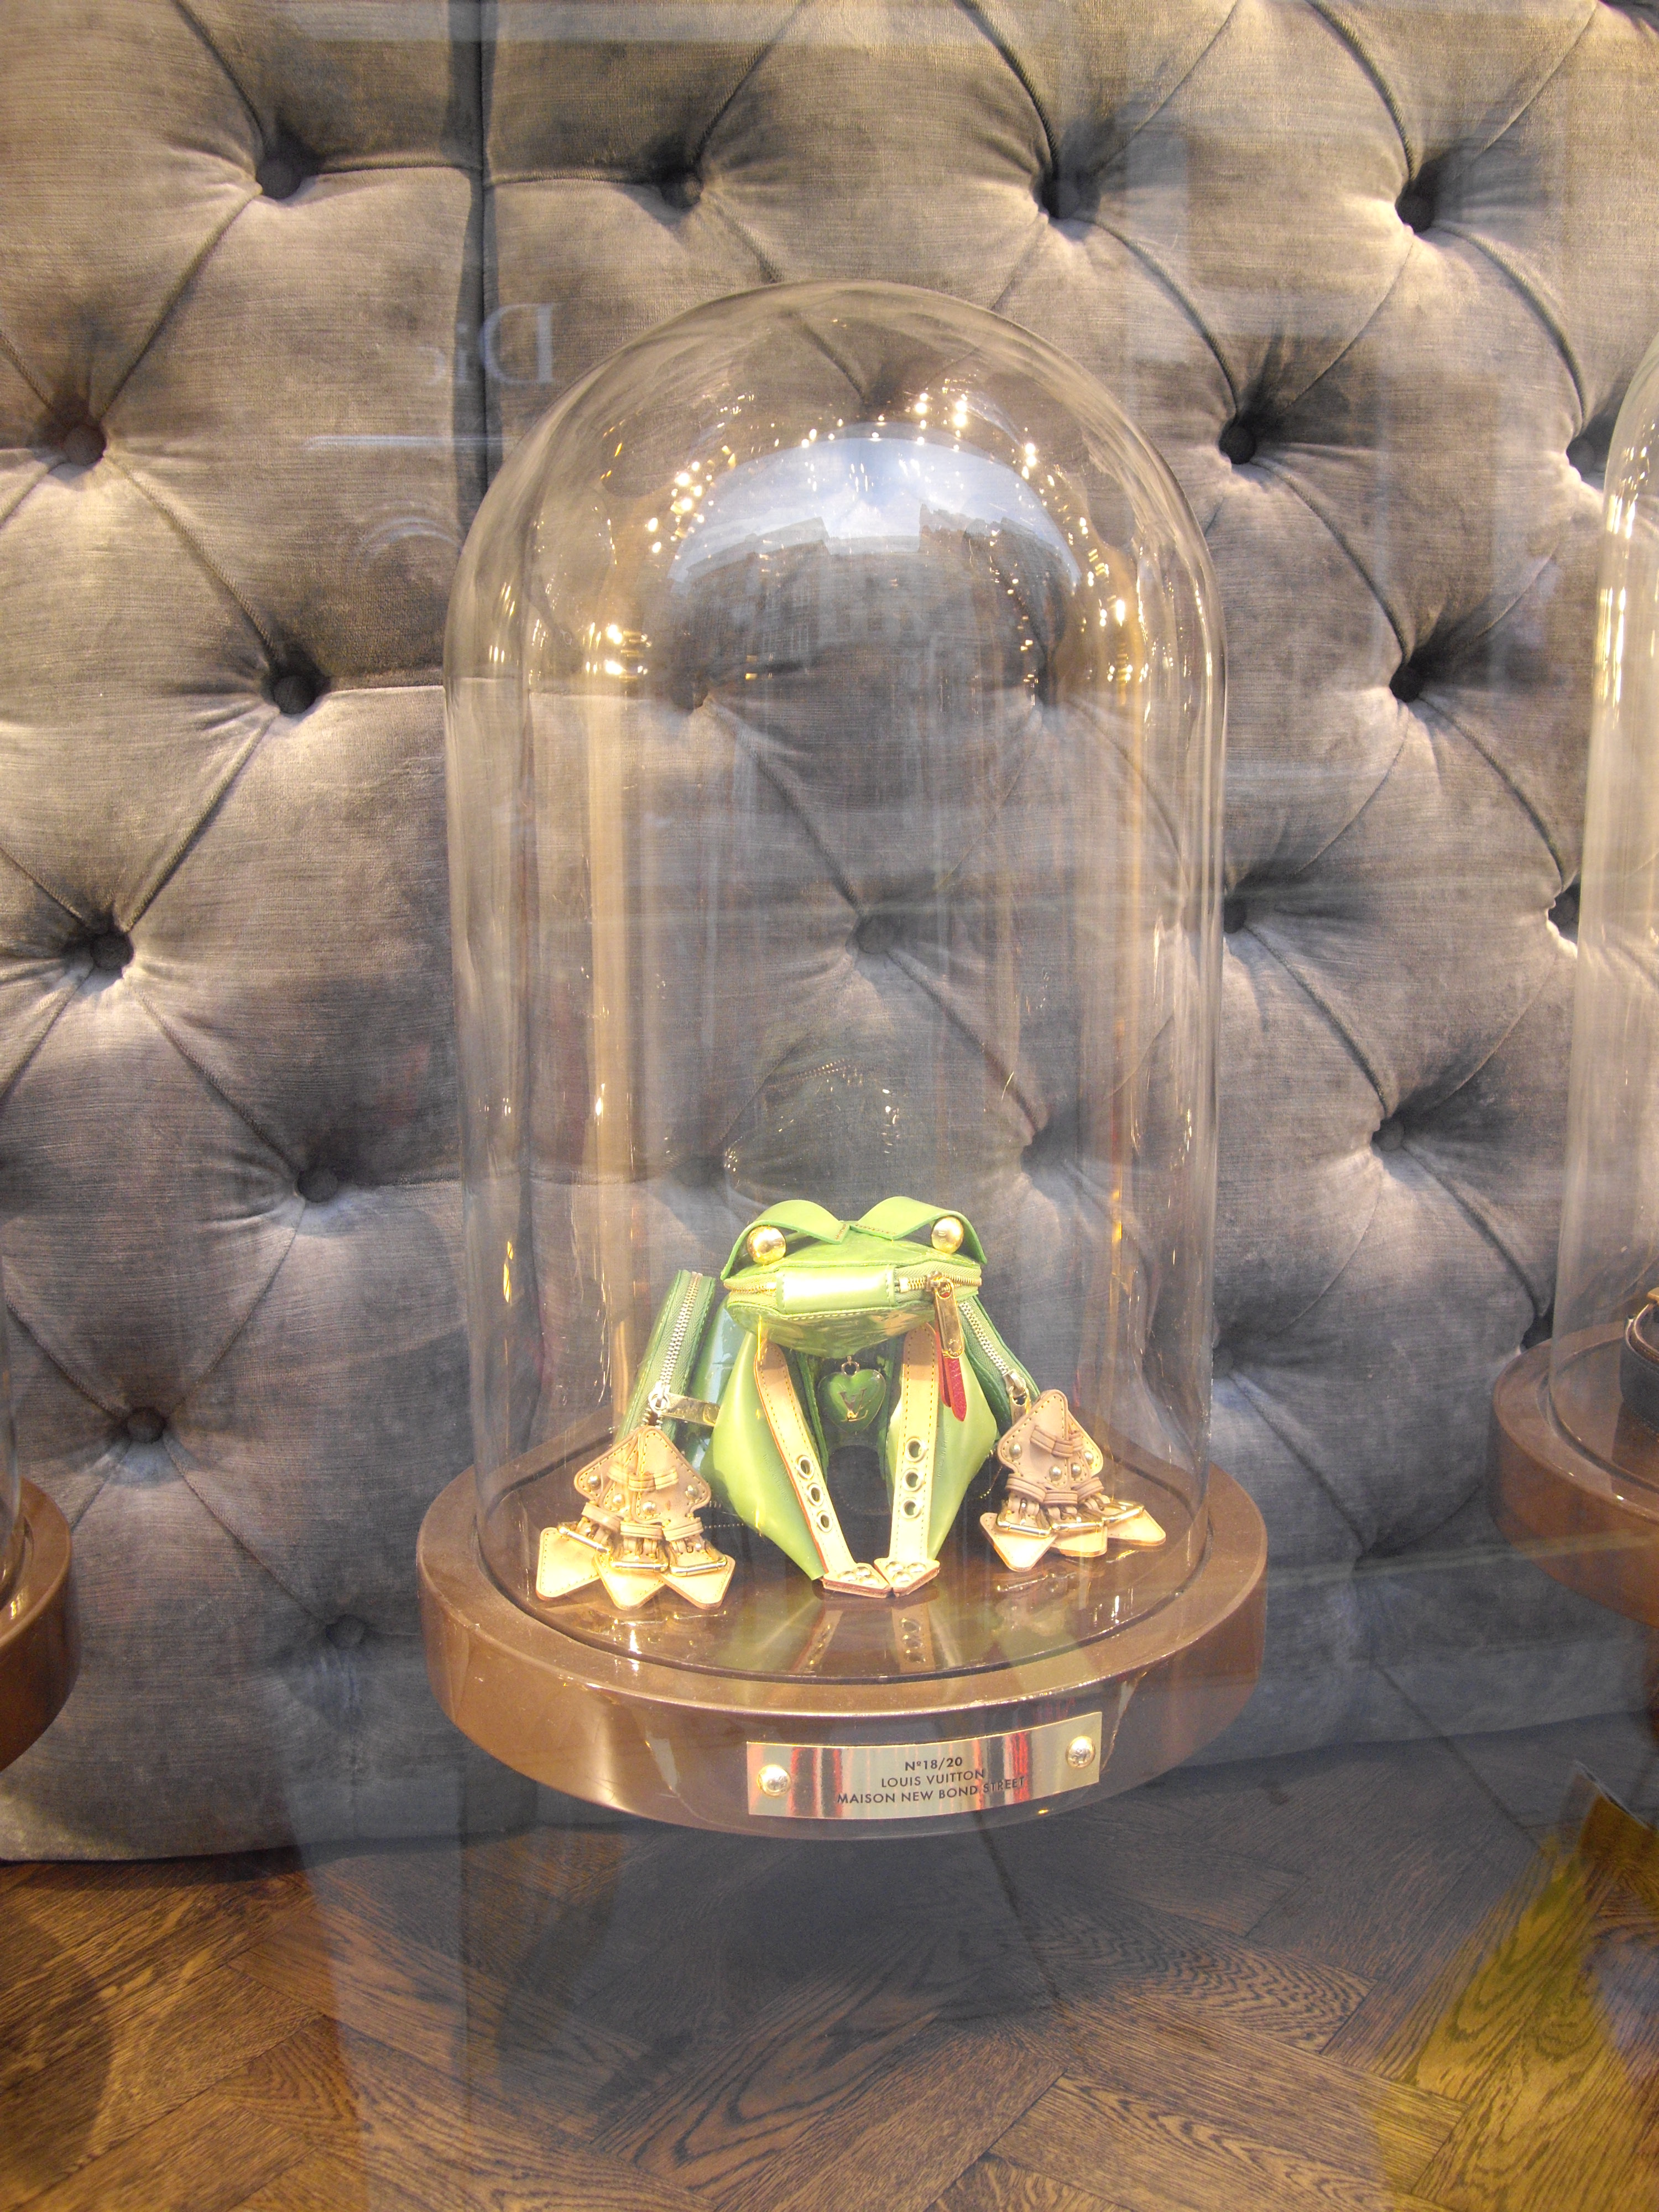 Frog made of small leather goods at Louis Vuitton!  So cute!